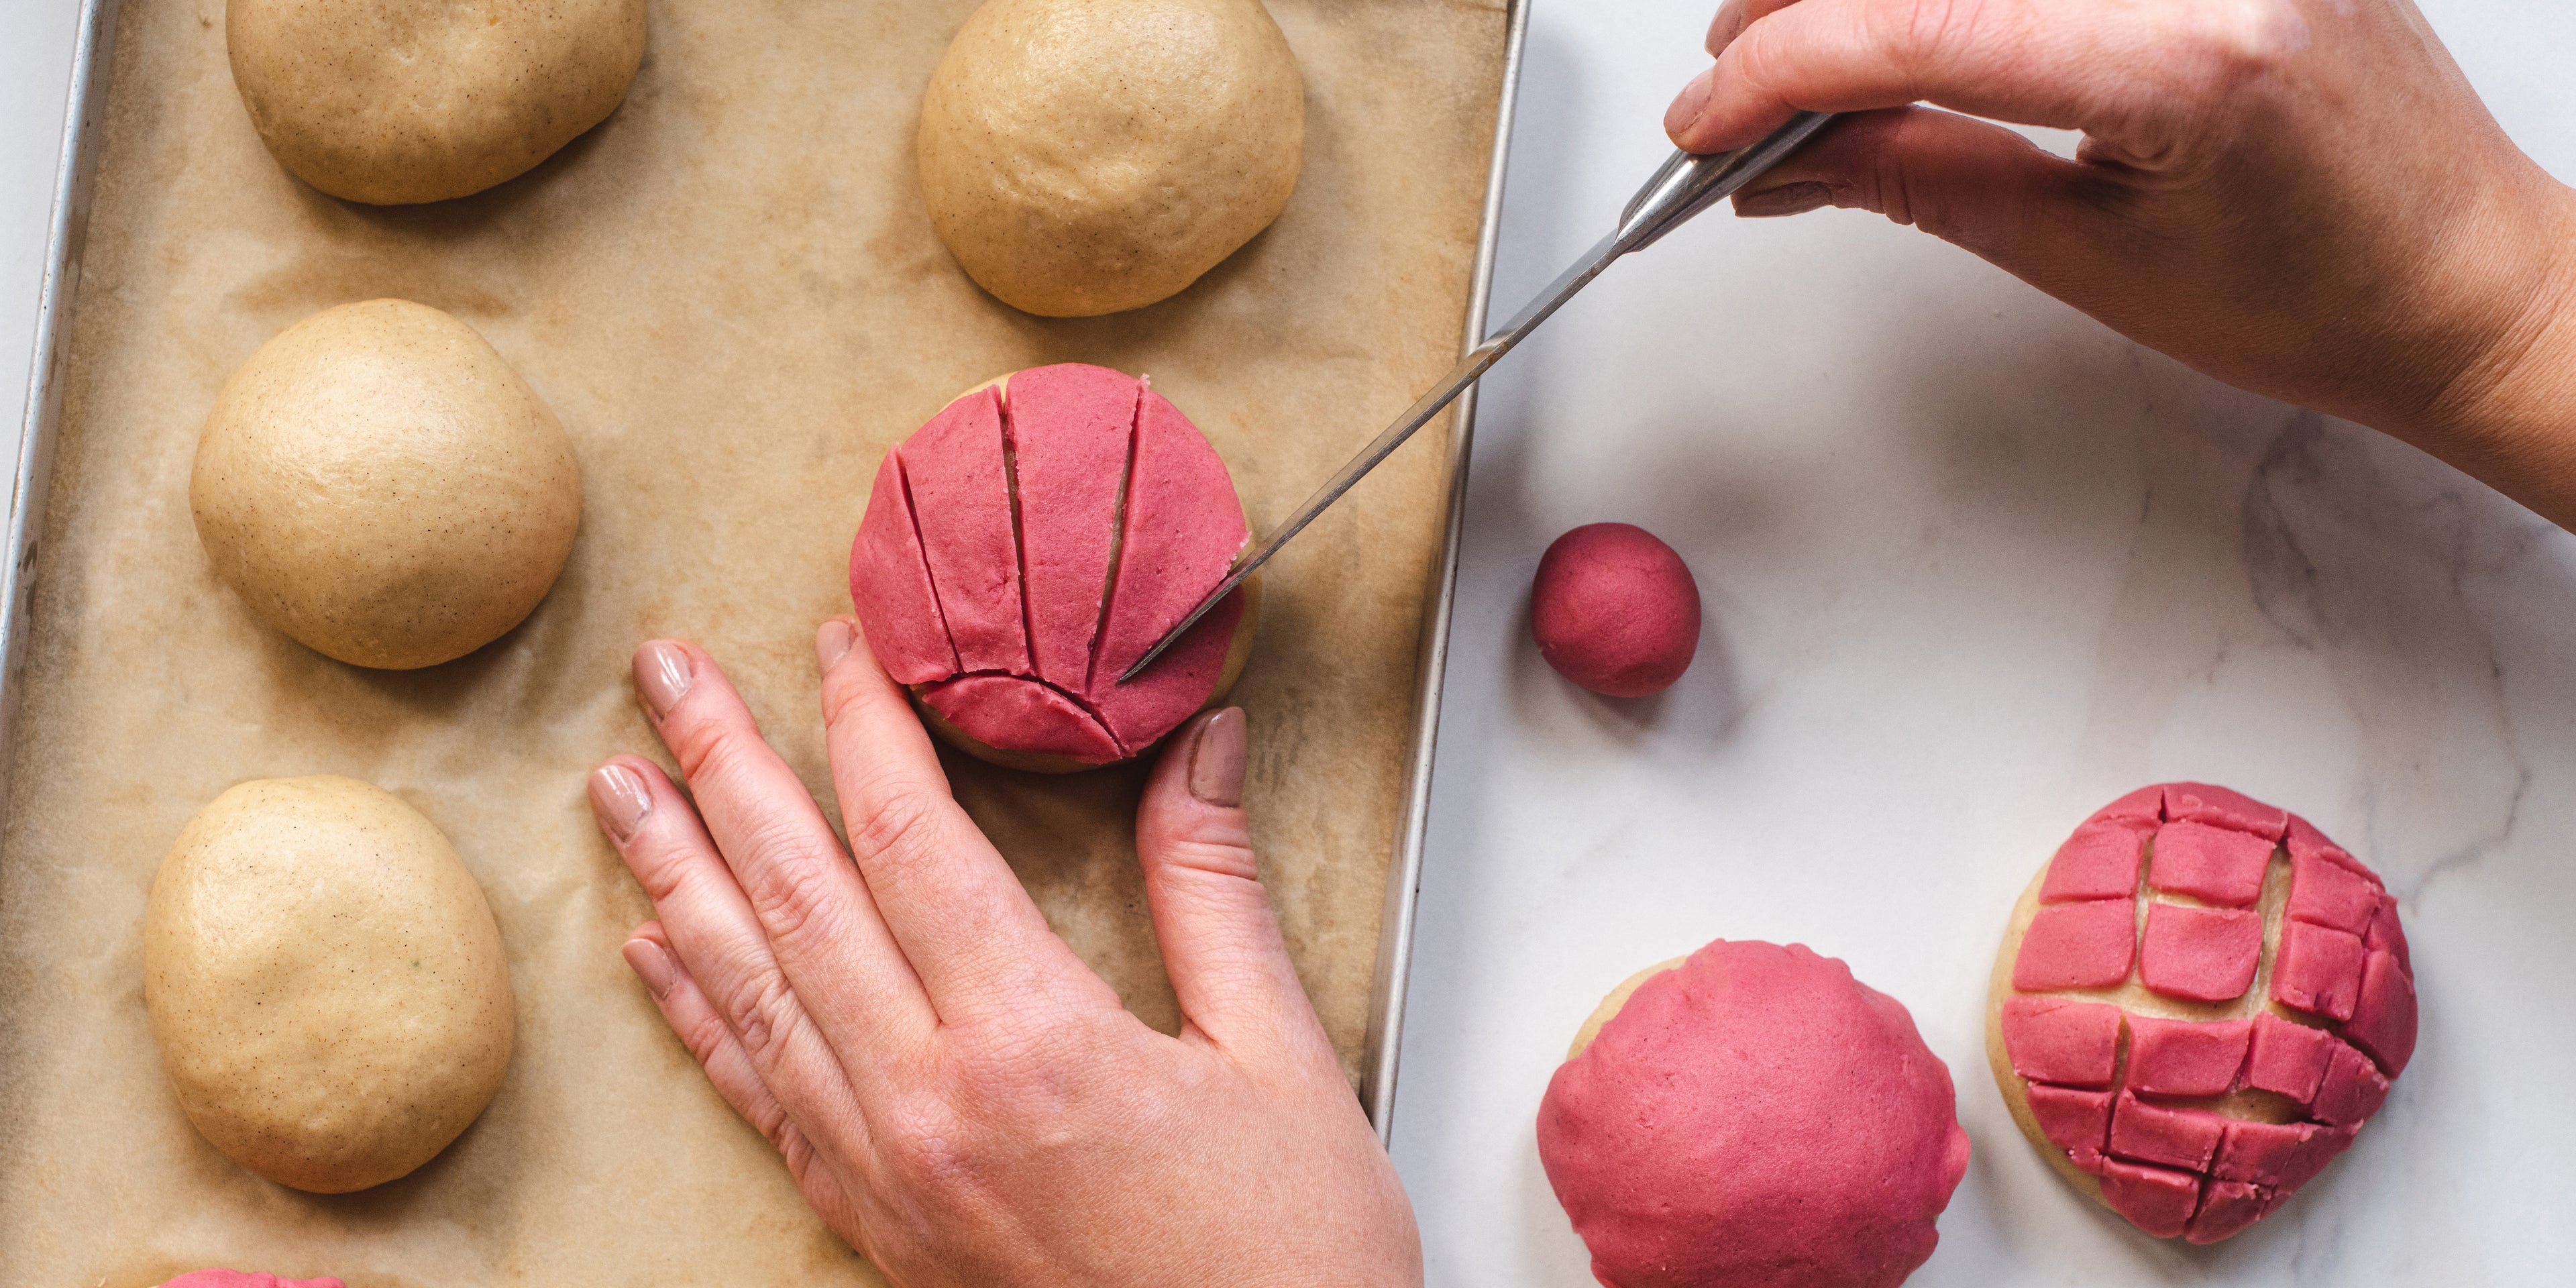 Hands holding a knife, hand decorating the pink layer onto of the Conchas balls